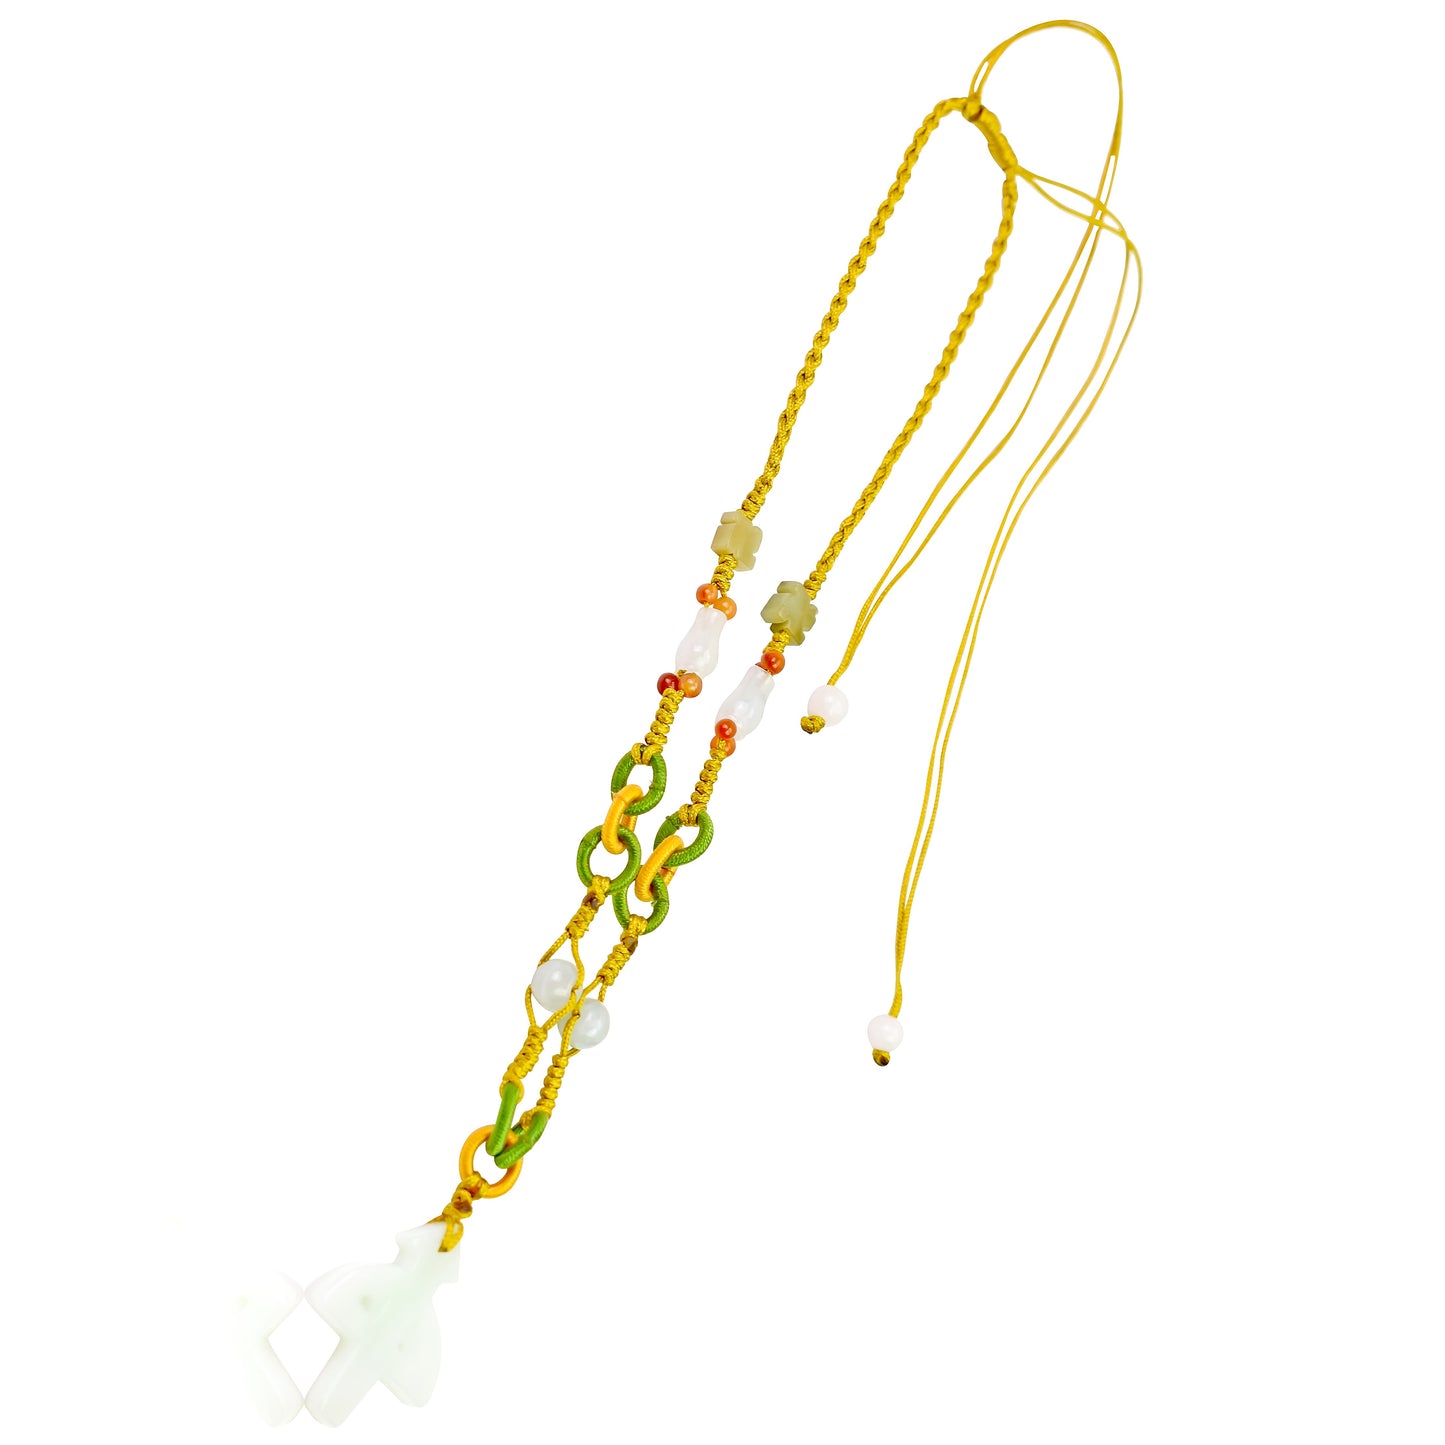 Let Your Sagittarius Side Shine with a Handmade Jade Necklace made with Yellow Cord